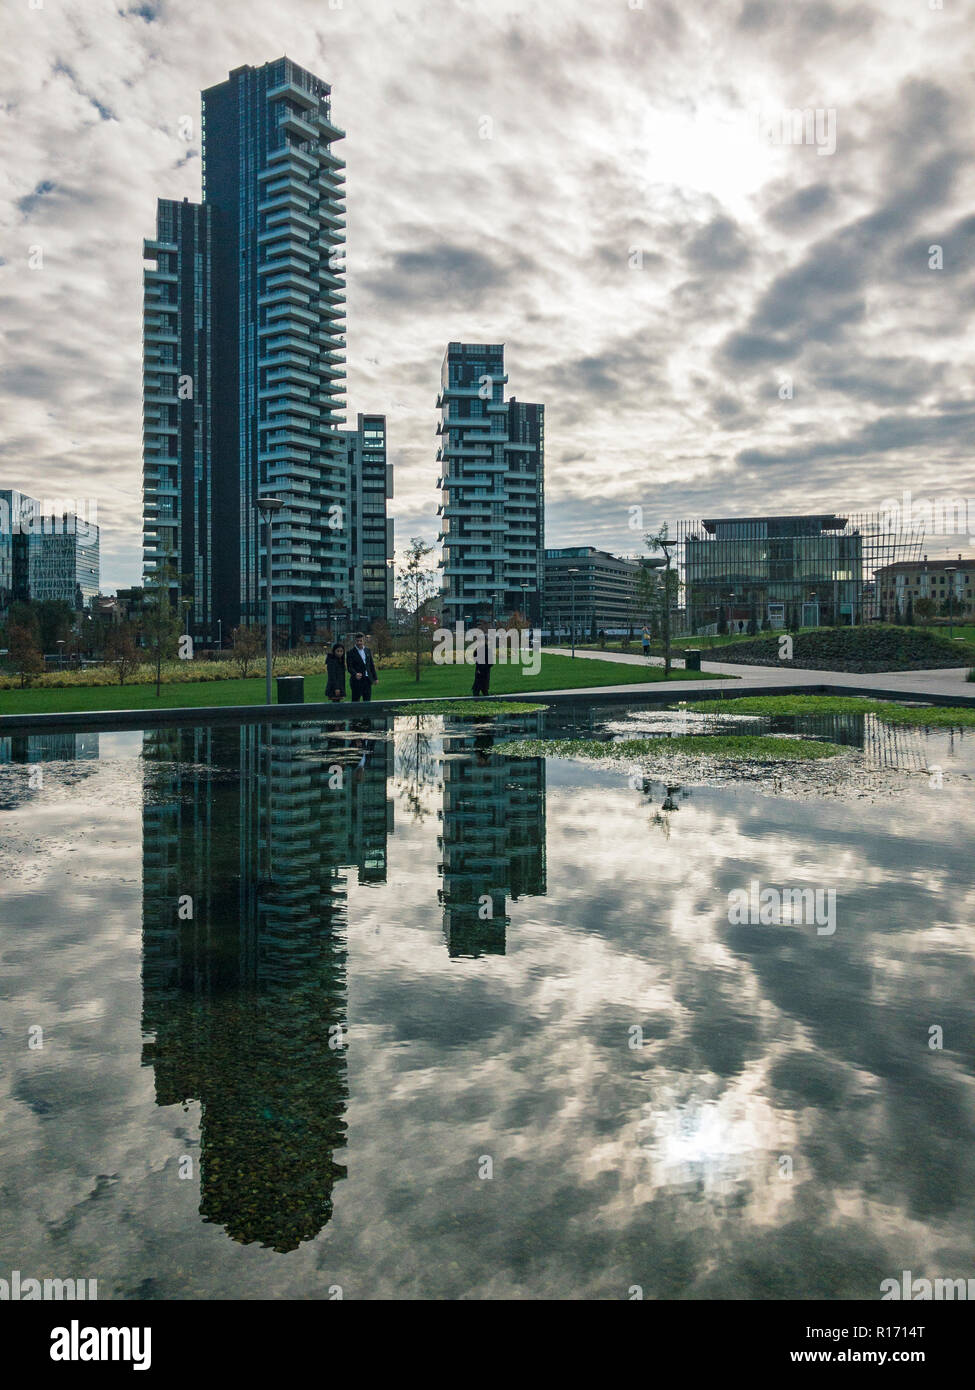 Library of trees, new Milan park. Solaria tower. Paths of the park with a panoramic view of the skyscrapers, Italy. Tower mirrored in the fountain Stock Photo